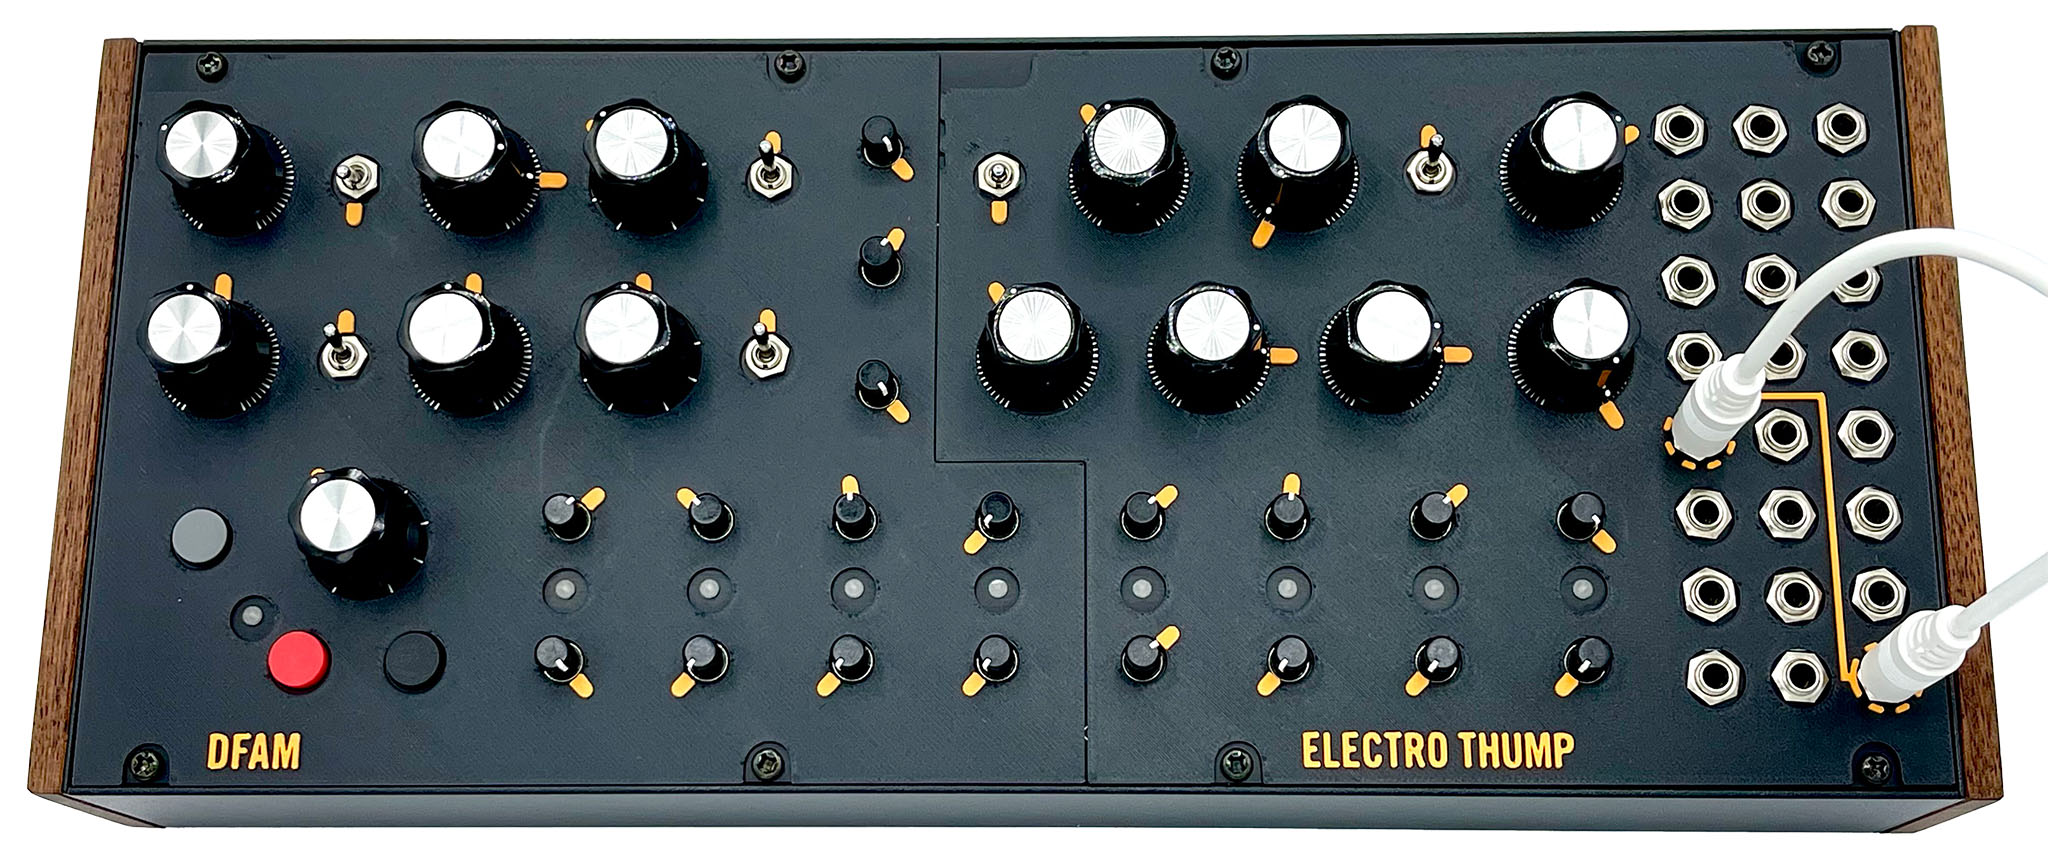 Electro Thump patch sheet placed on the DFAM Synthesizer